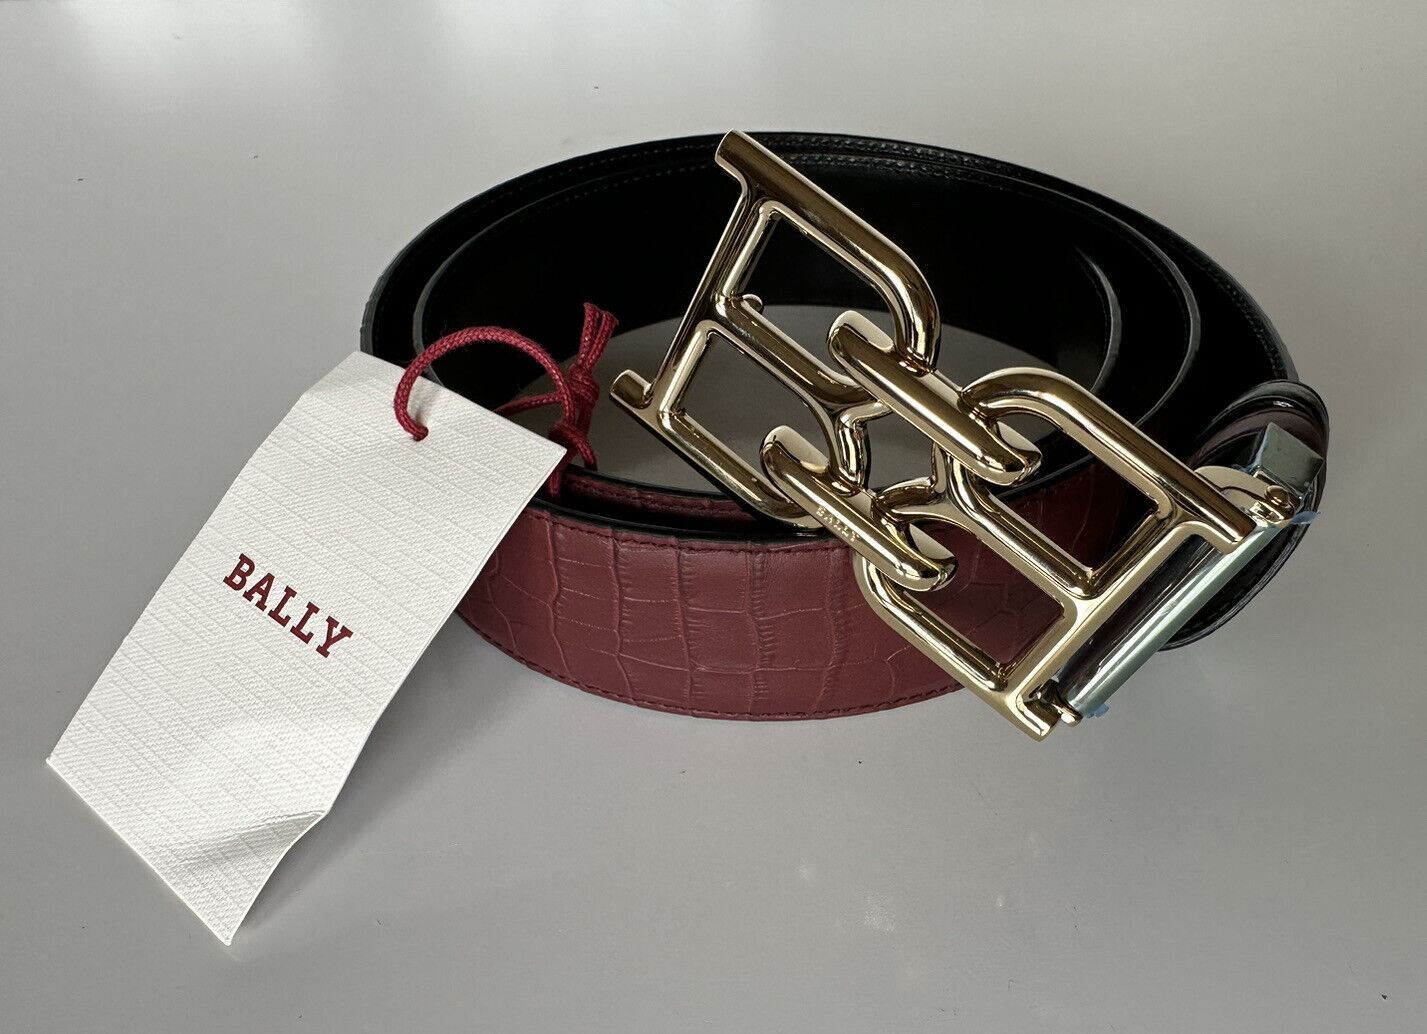 NWT $325 Bally Men's Double Sided B Chain Heritage Red Belt 38/95 Italy 630037